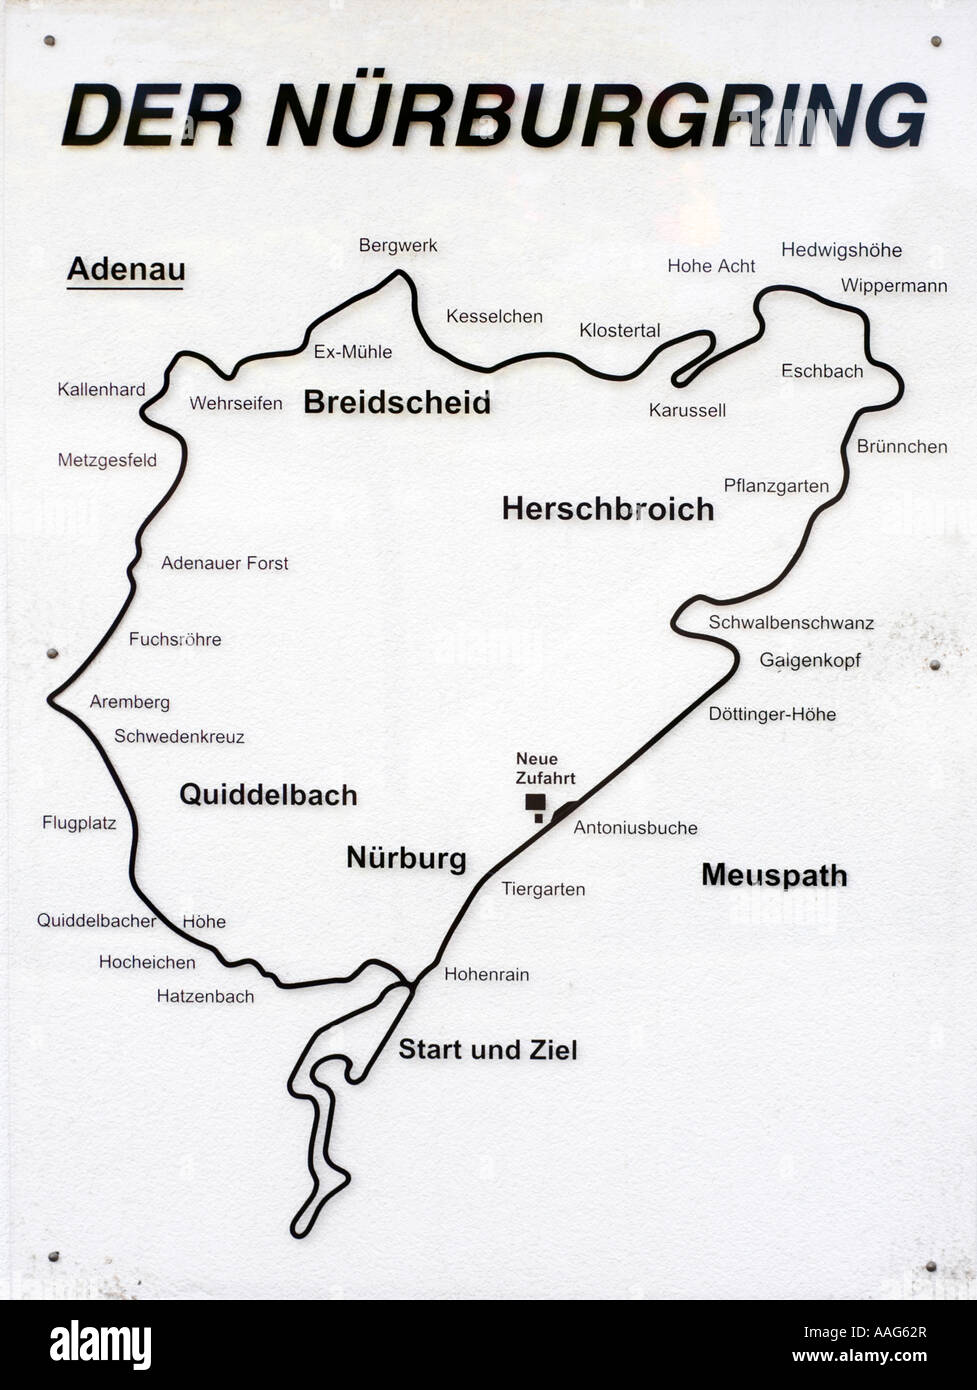 ring-map-outside-the-nordschleife-public